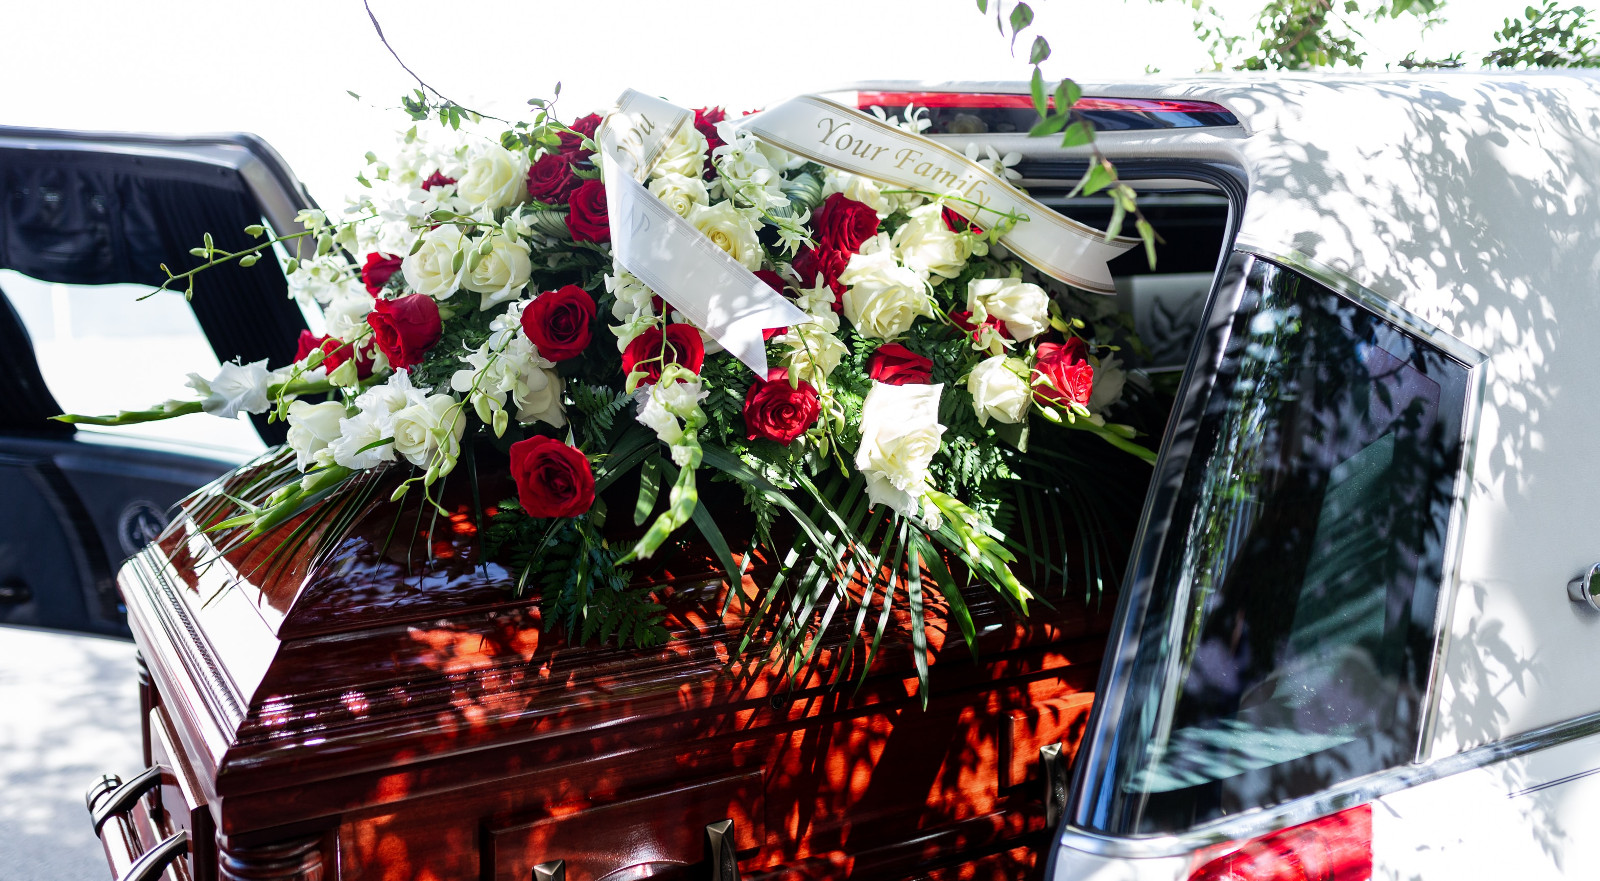 Intestacy: Who Makes The Funeral Arrangements?